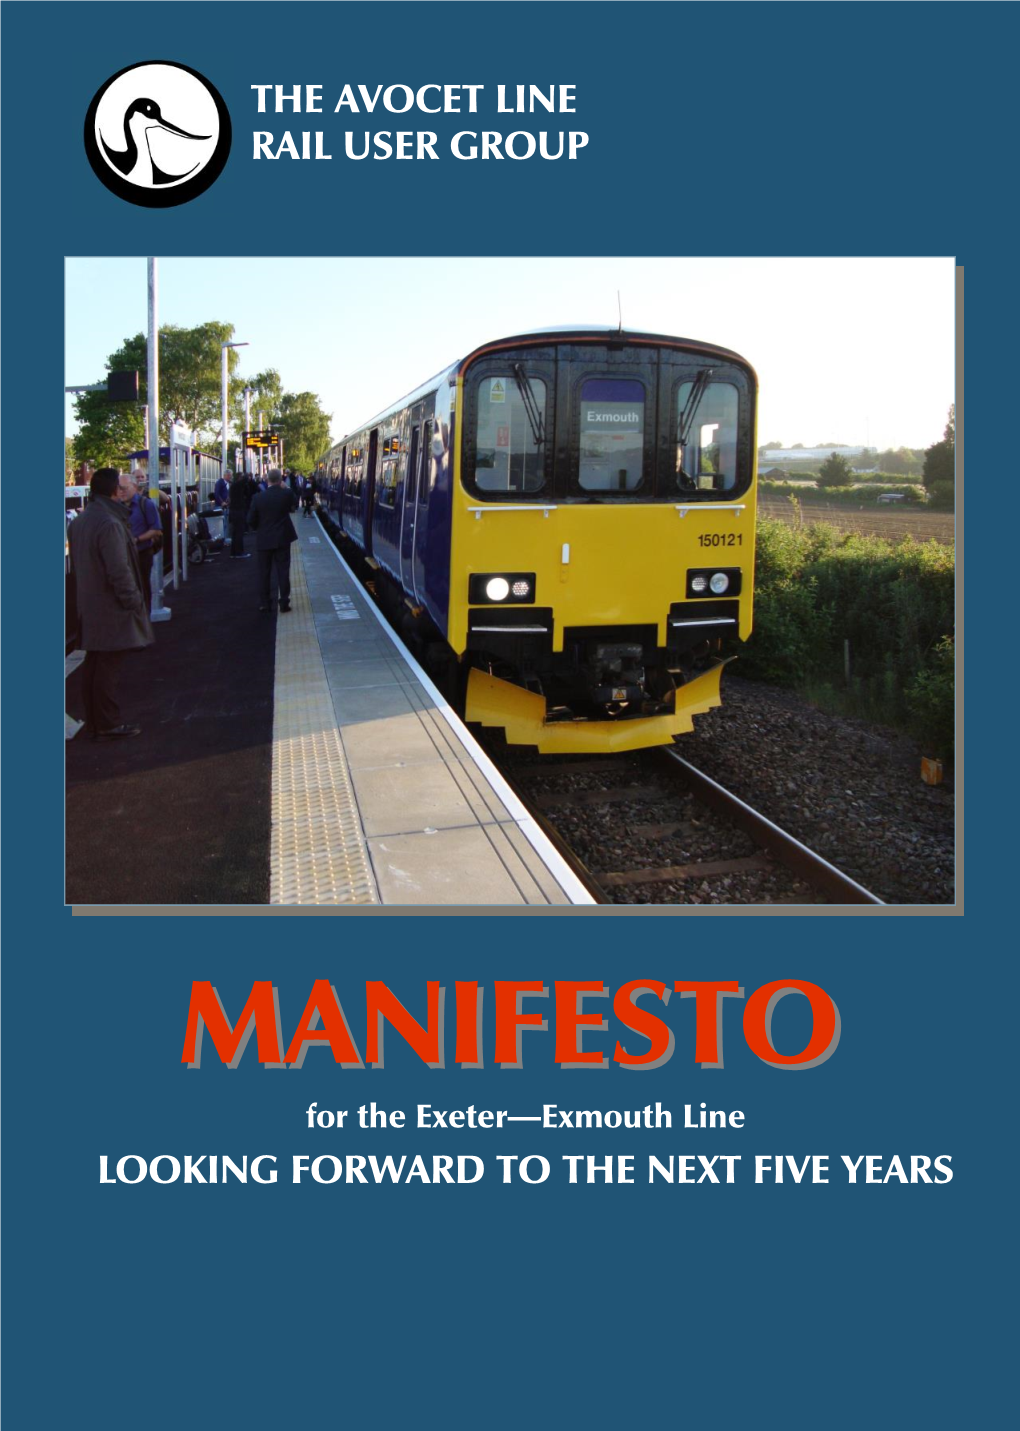 Manifesto for the Exeter – Exmouth Line